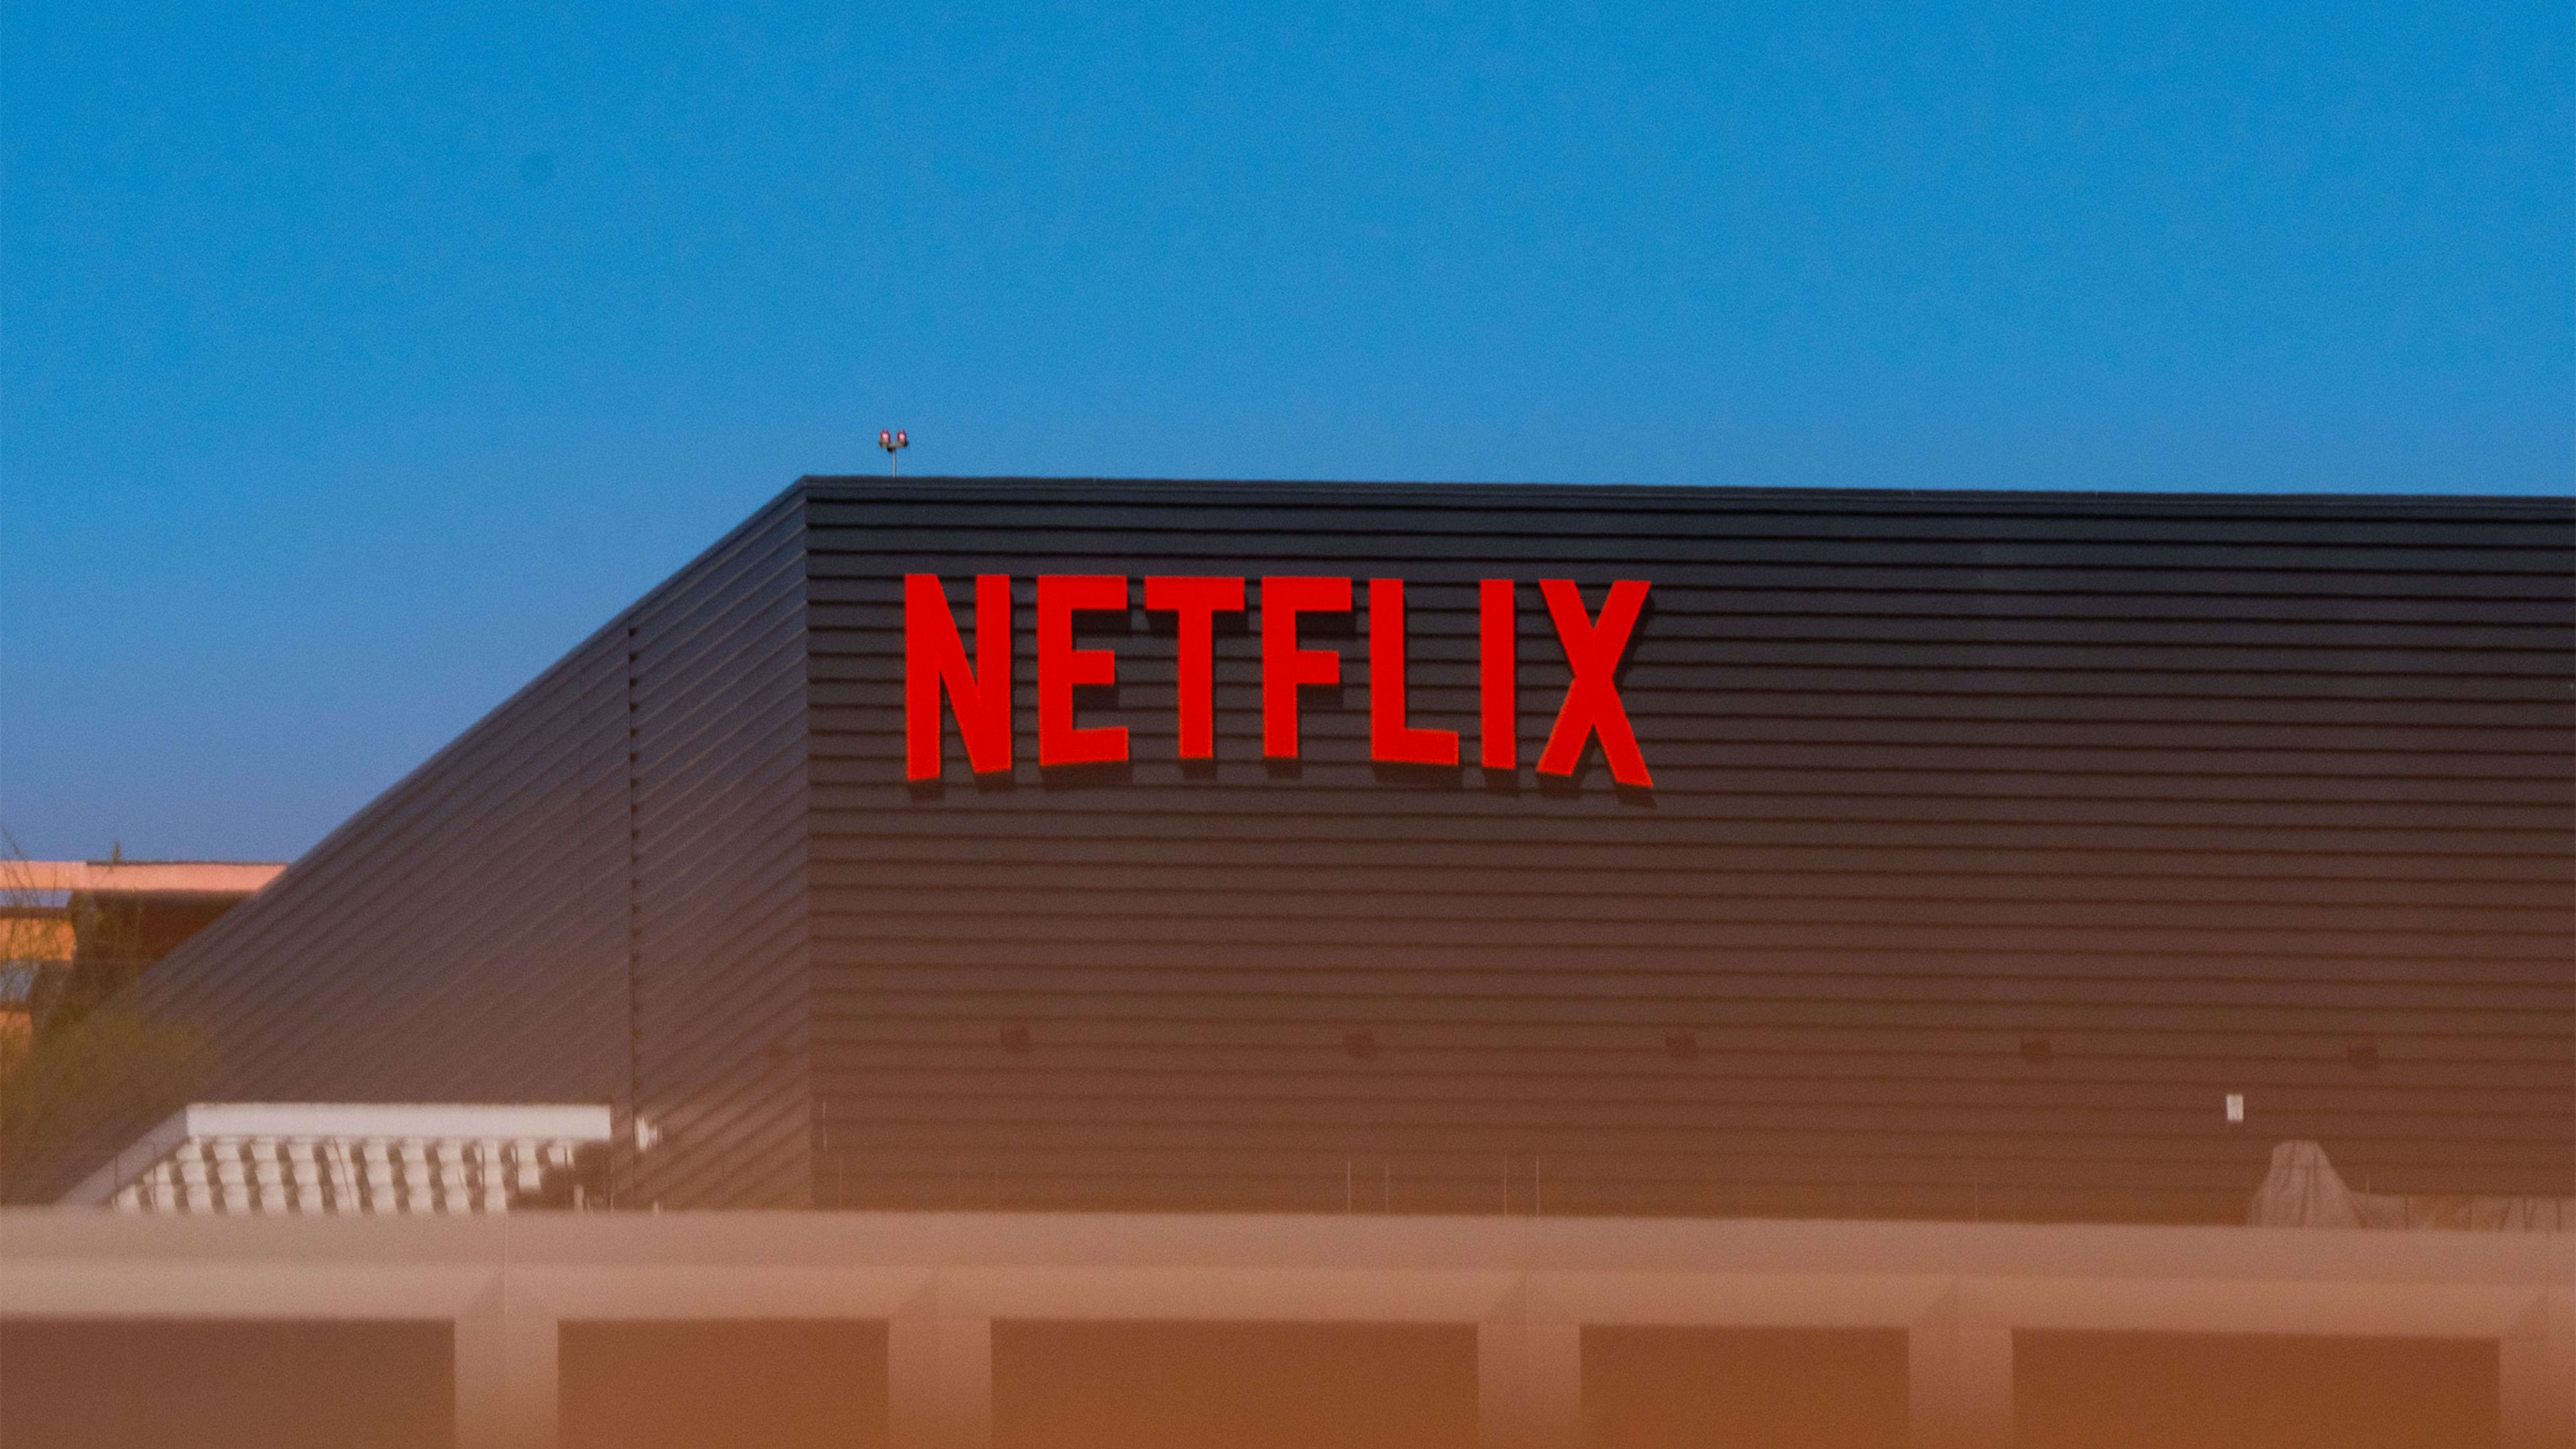 Netflix’s crackdown on password sharing is working. New subscriber count up 236%: report